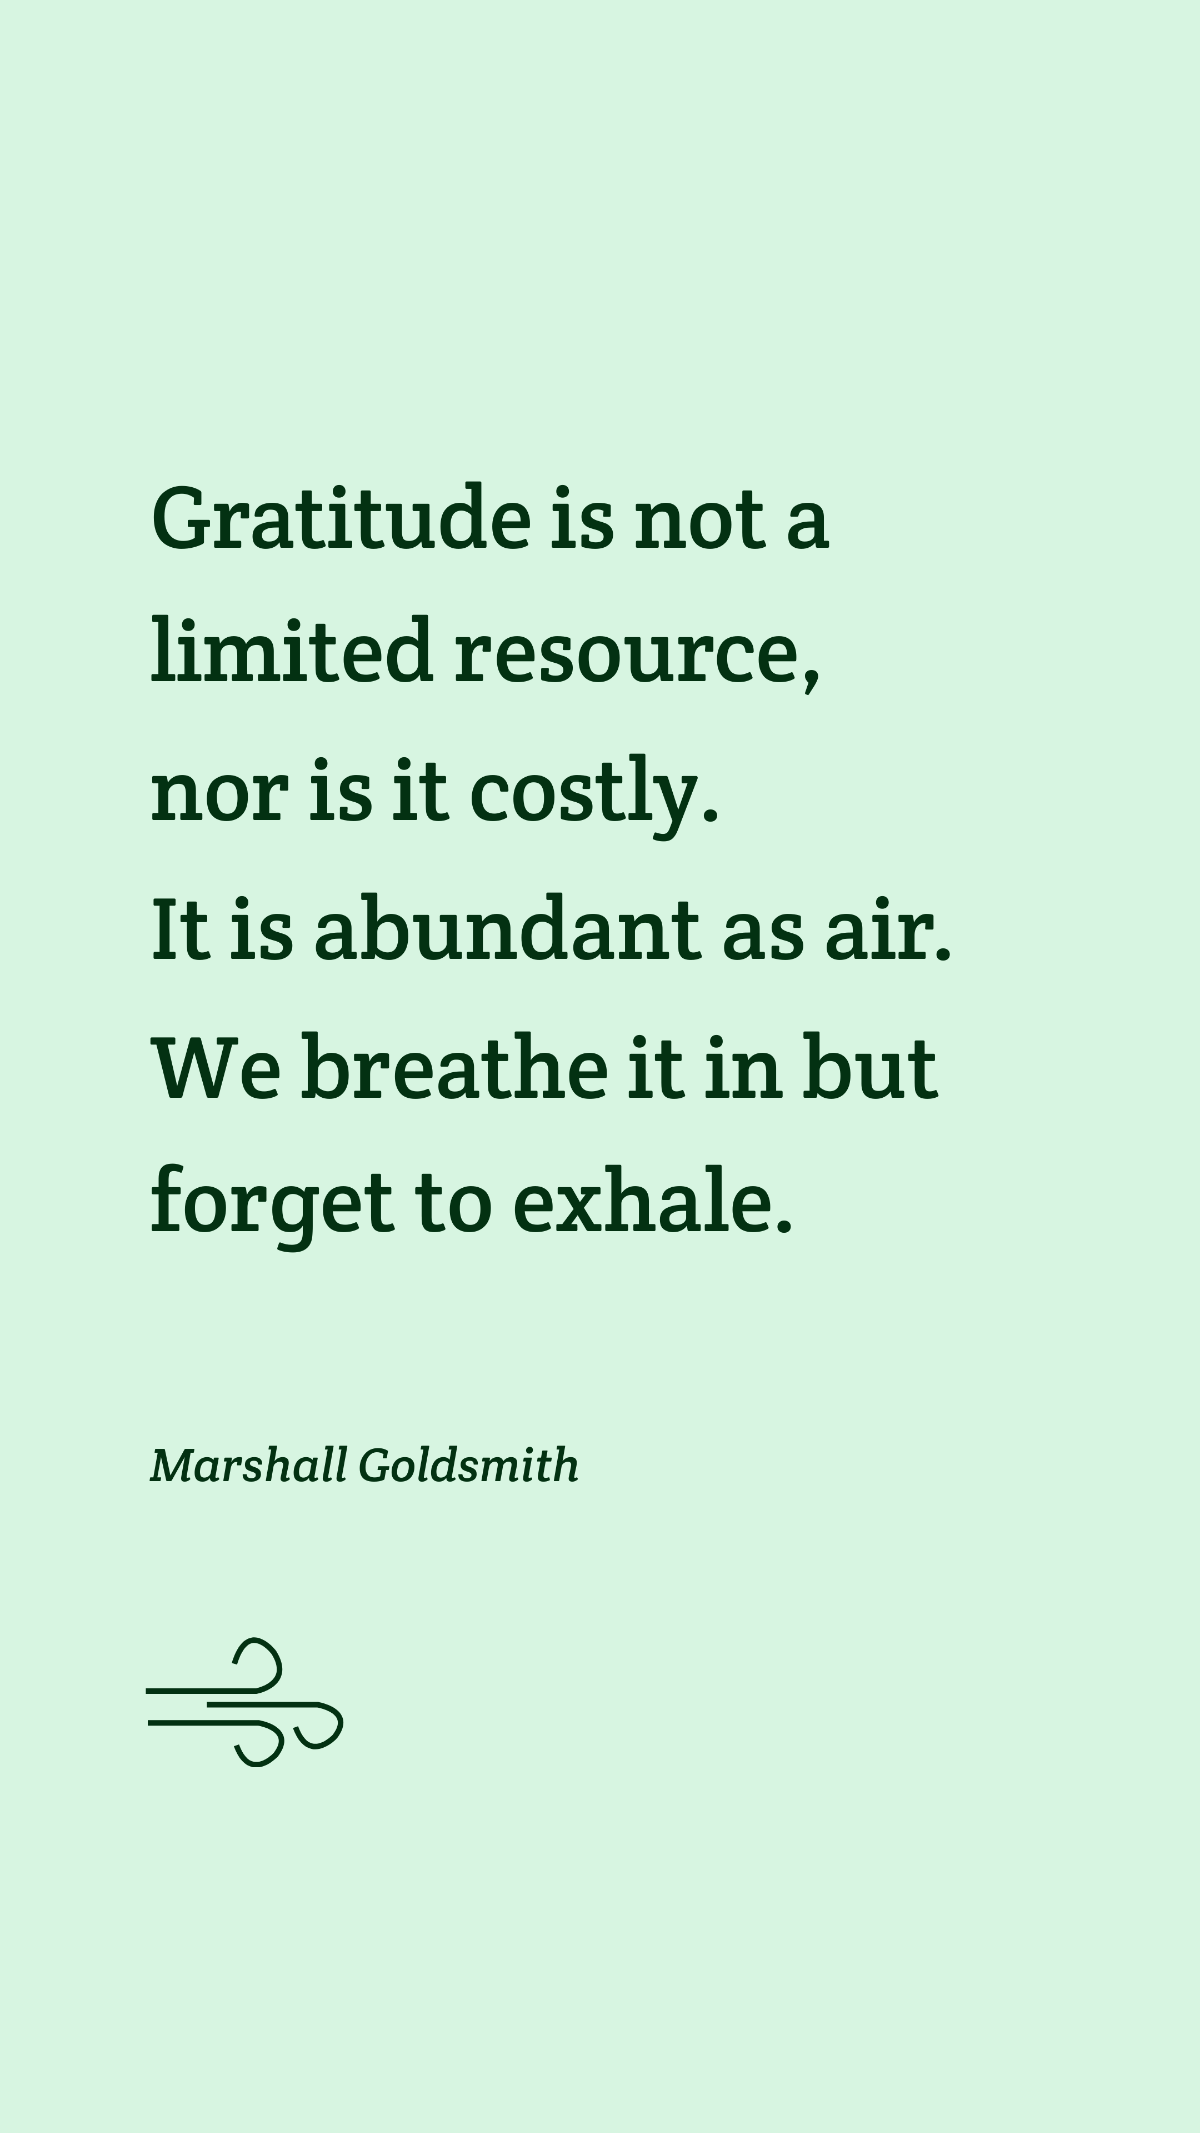 Free Marshall Goldsmith - Gratitude is not a limited resource, nor is it costly. It is abundant as air. We breathe it in but forget to exhale. Template